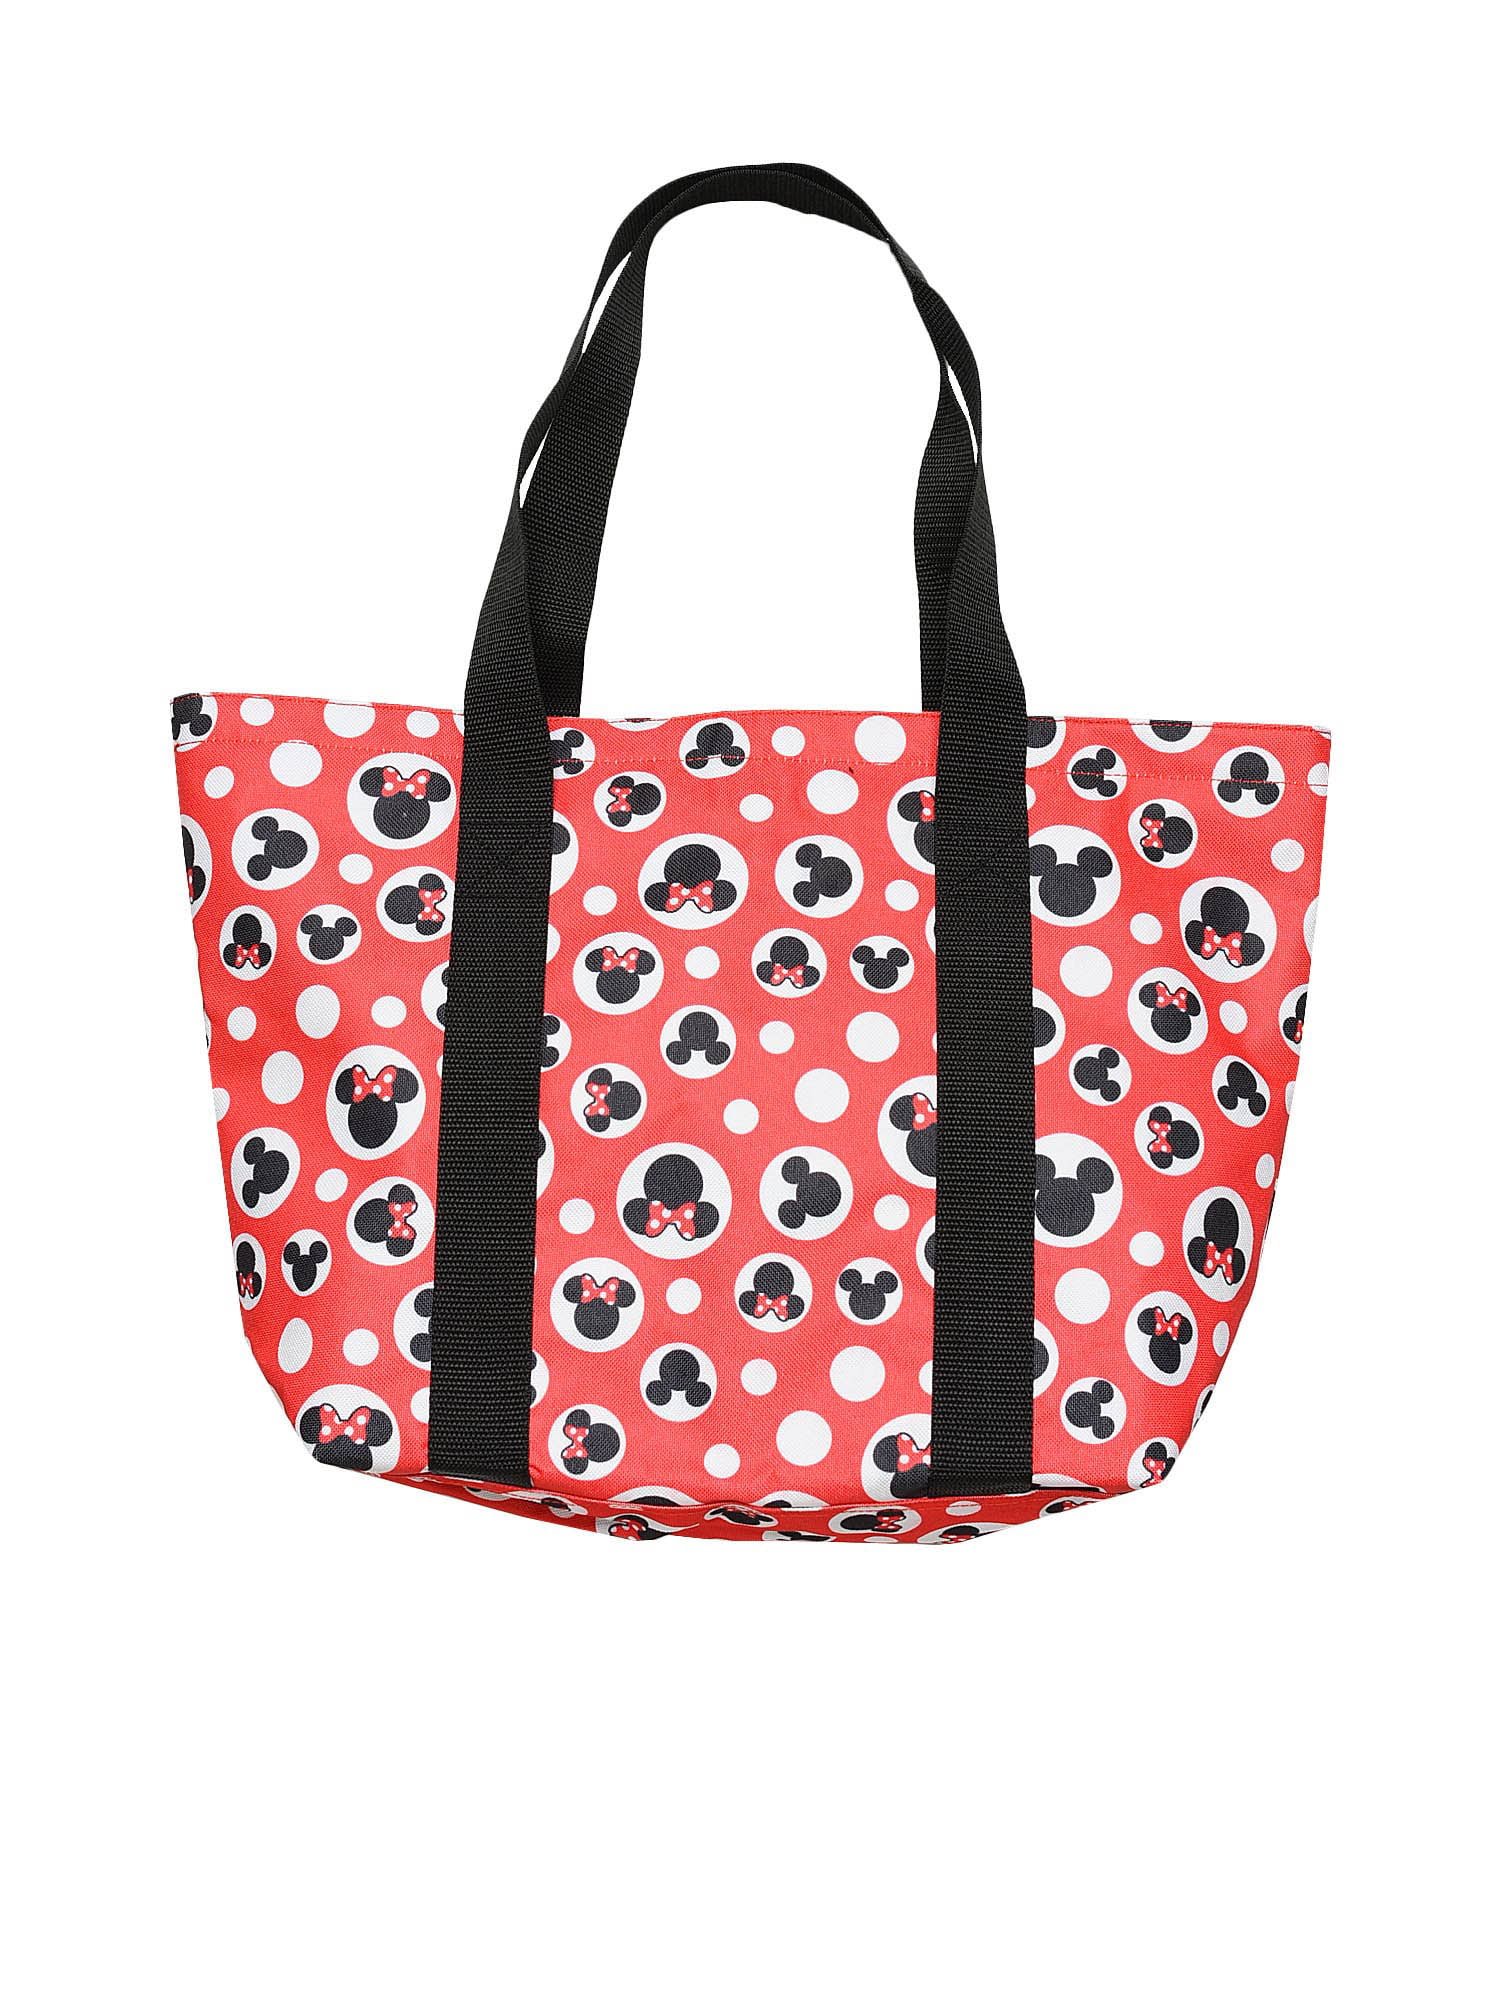 Minnie Mouse Red Tote Bag 